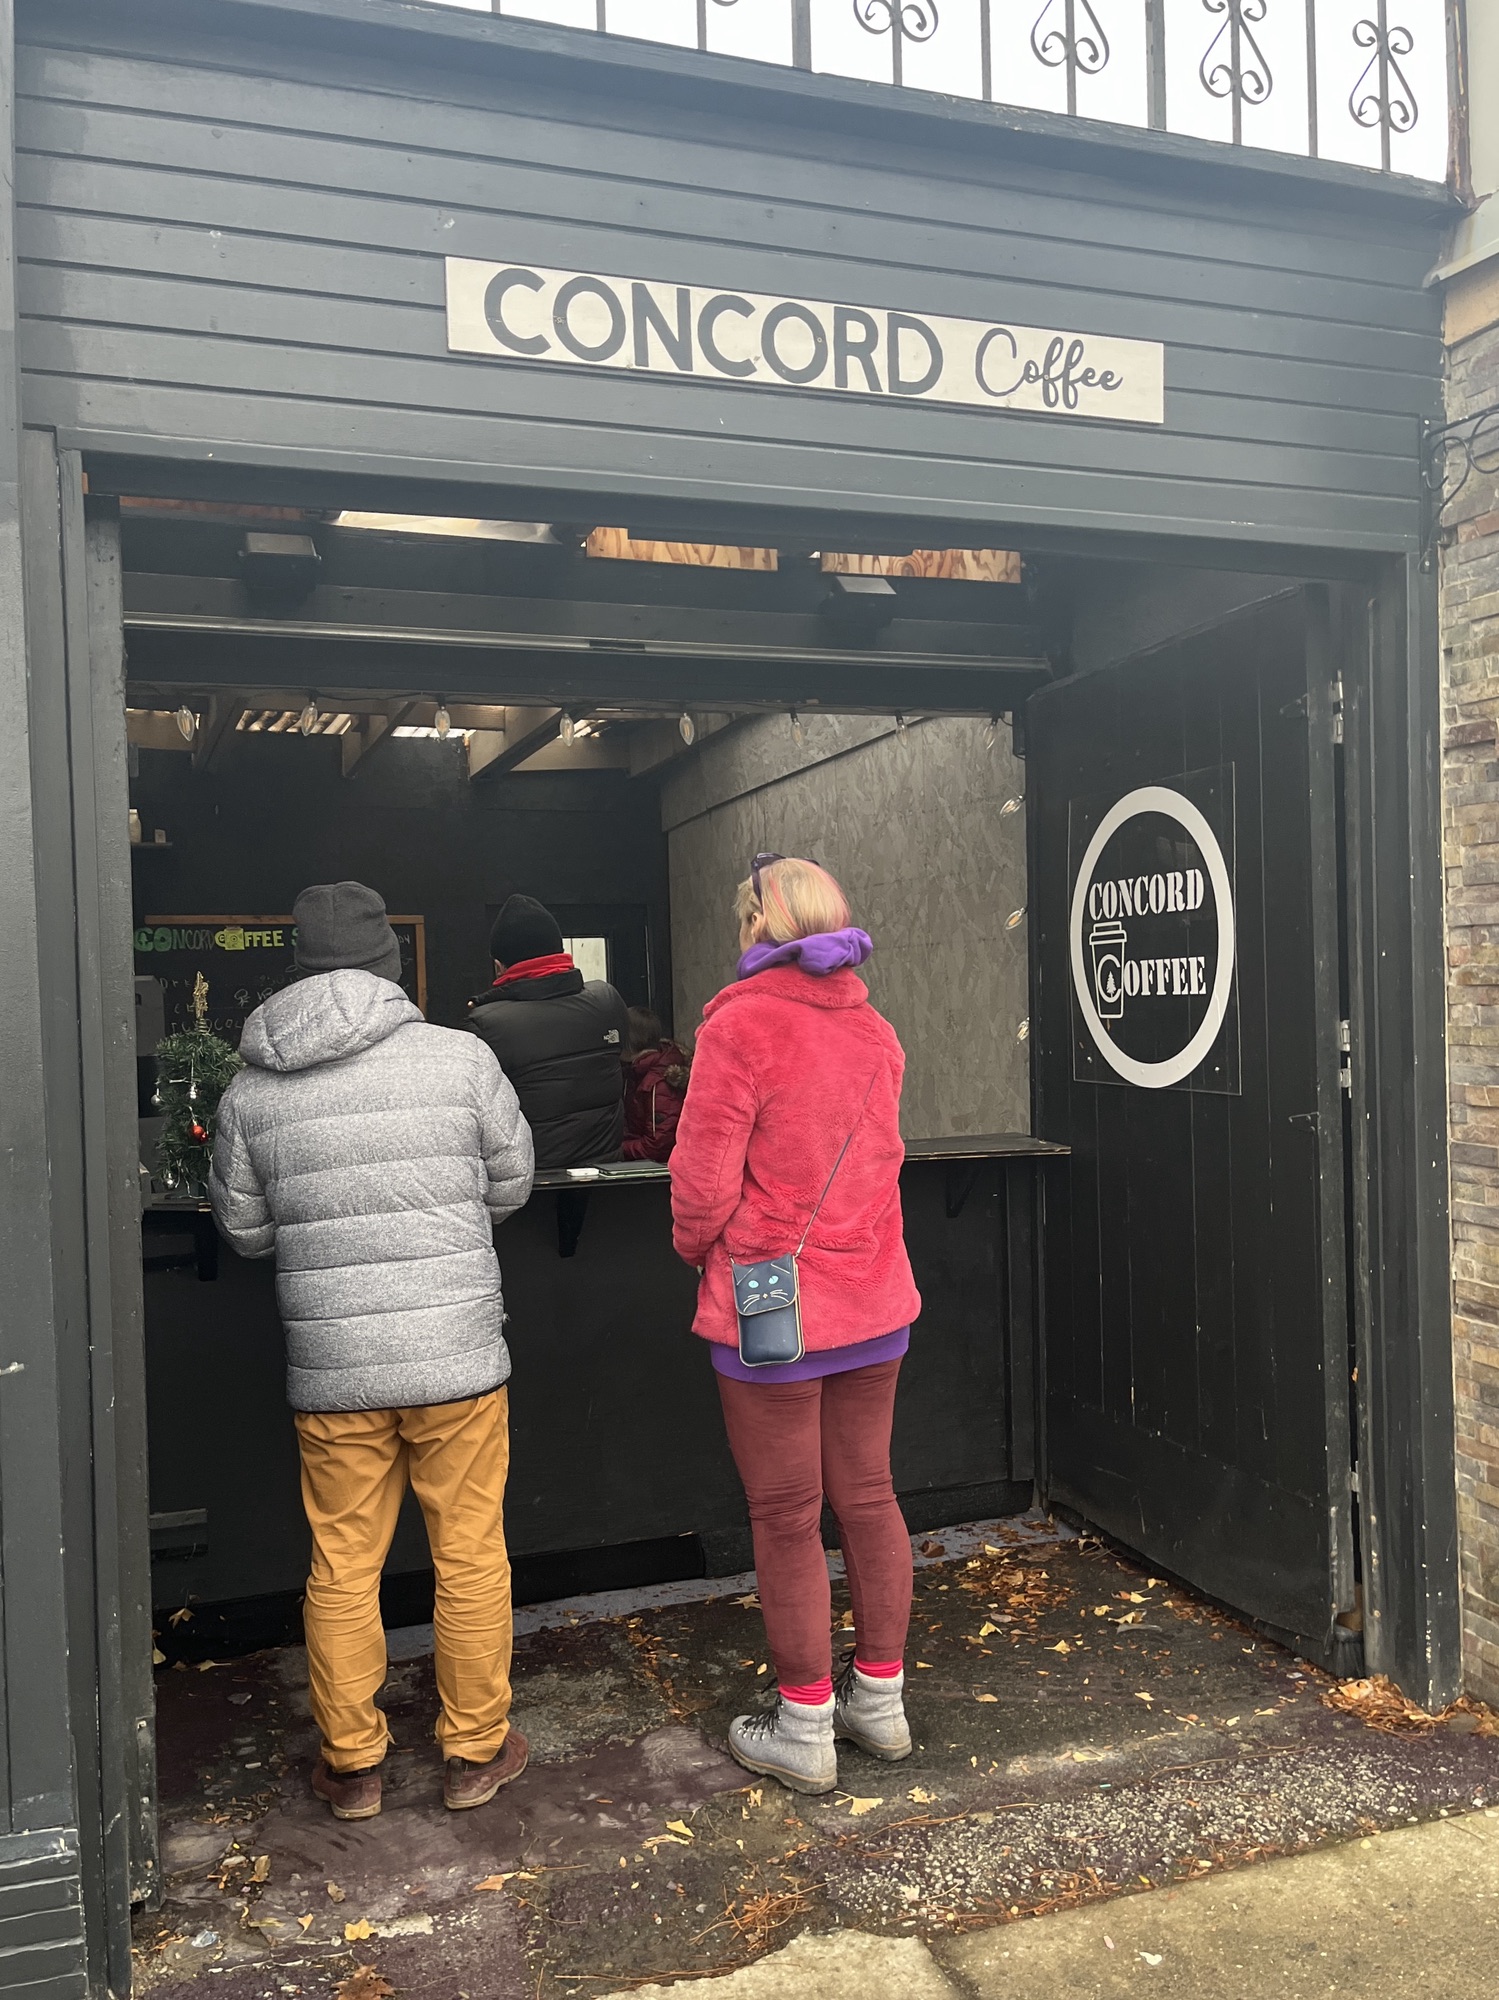 Concord Coffee by Concord in the City